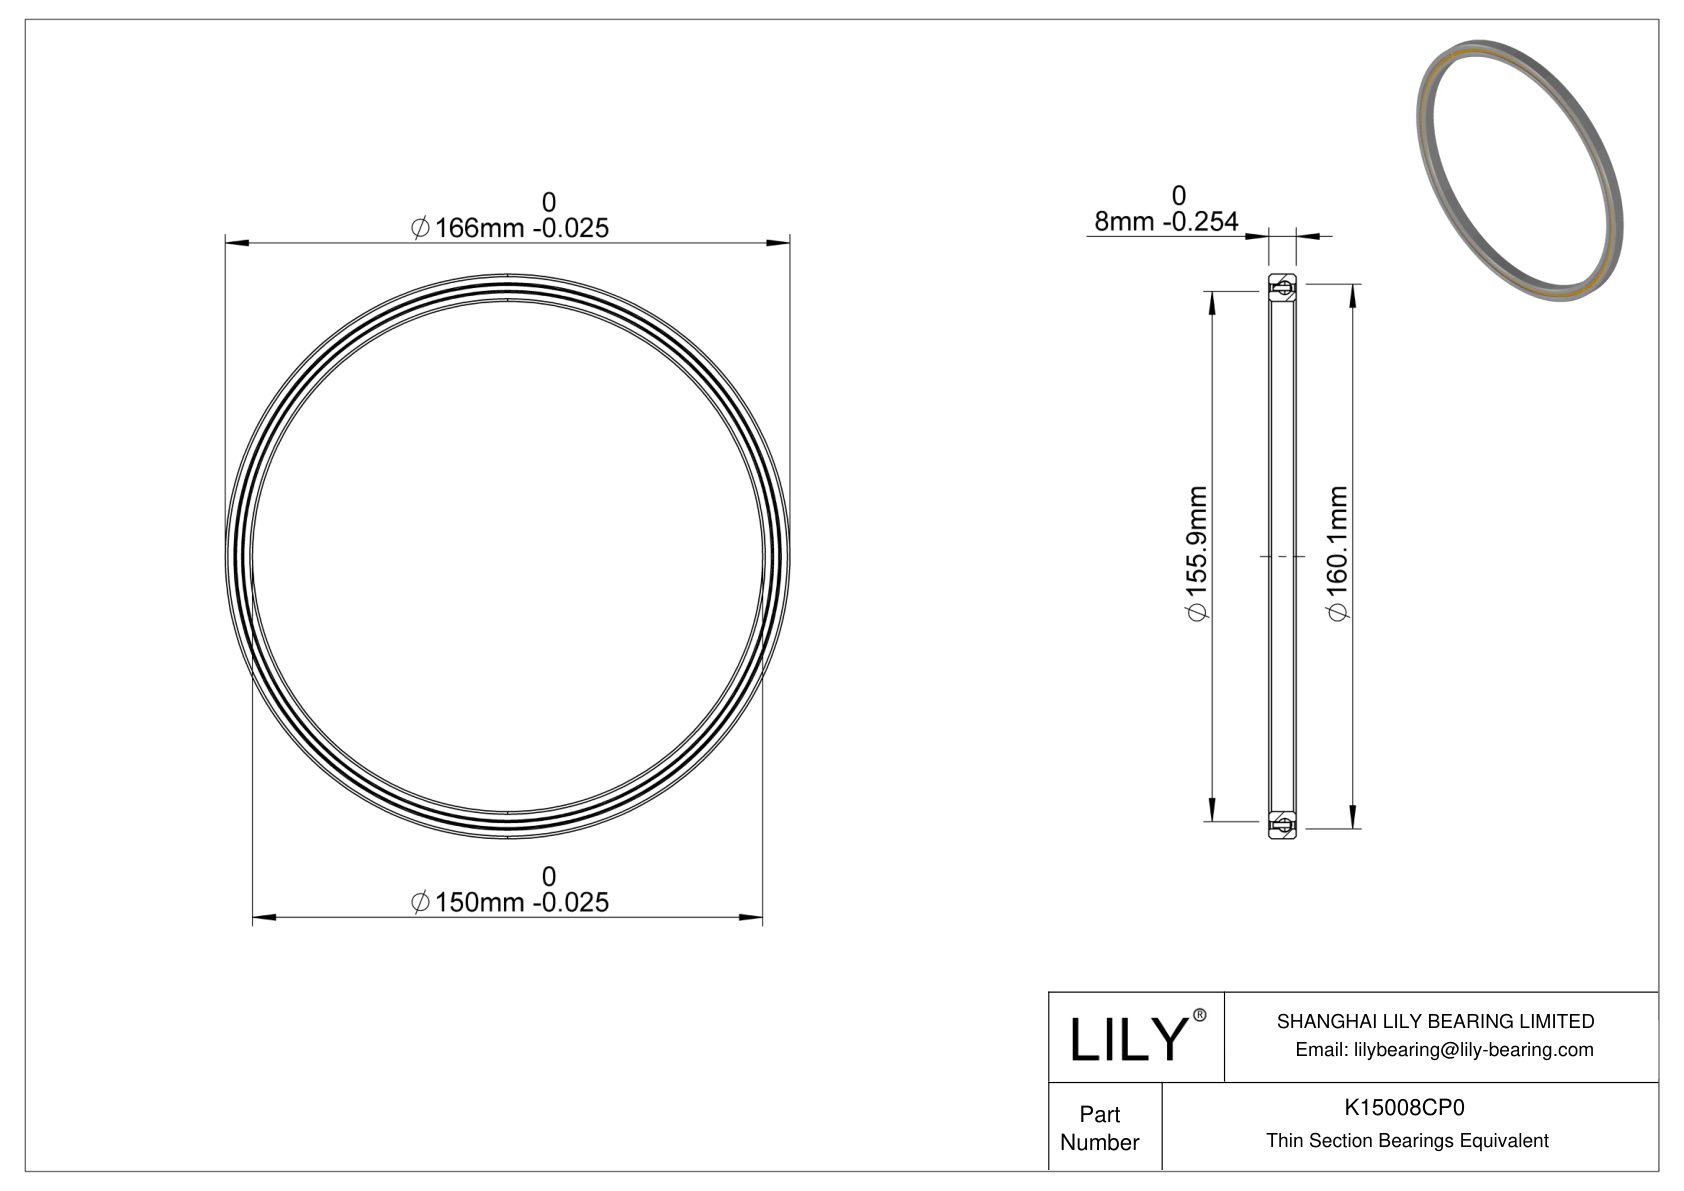 K15008CP0 Constant Section (CS) Bearings cad drawing